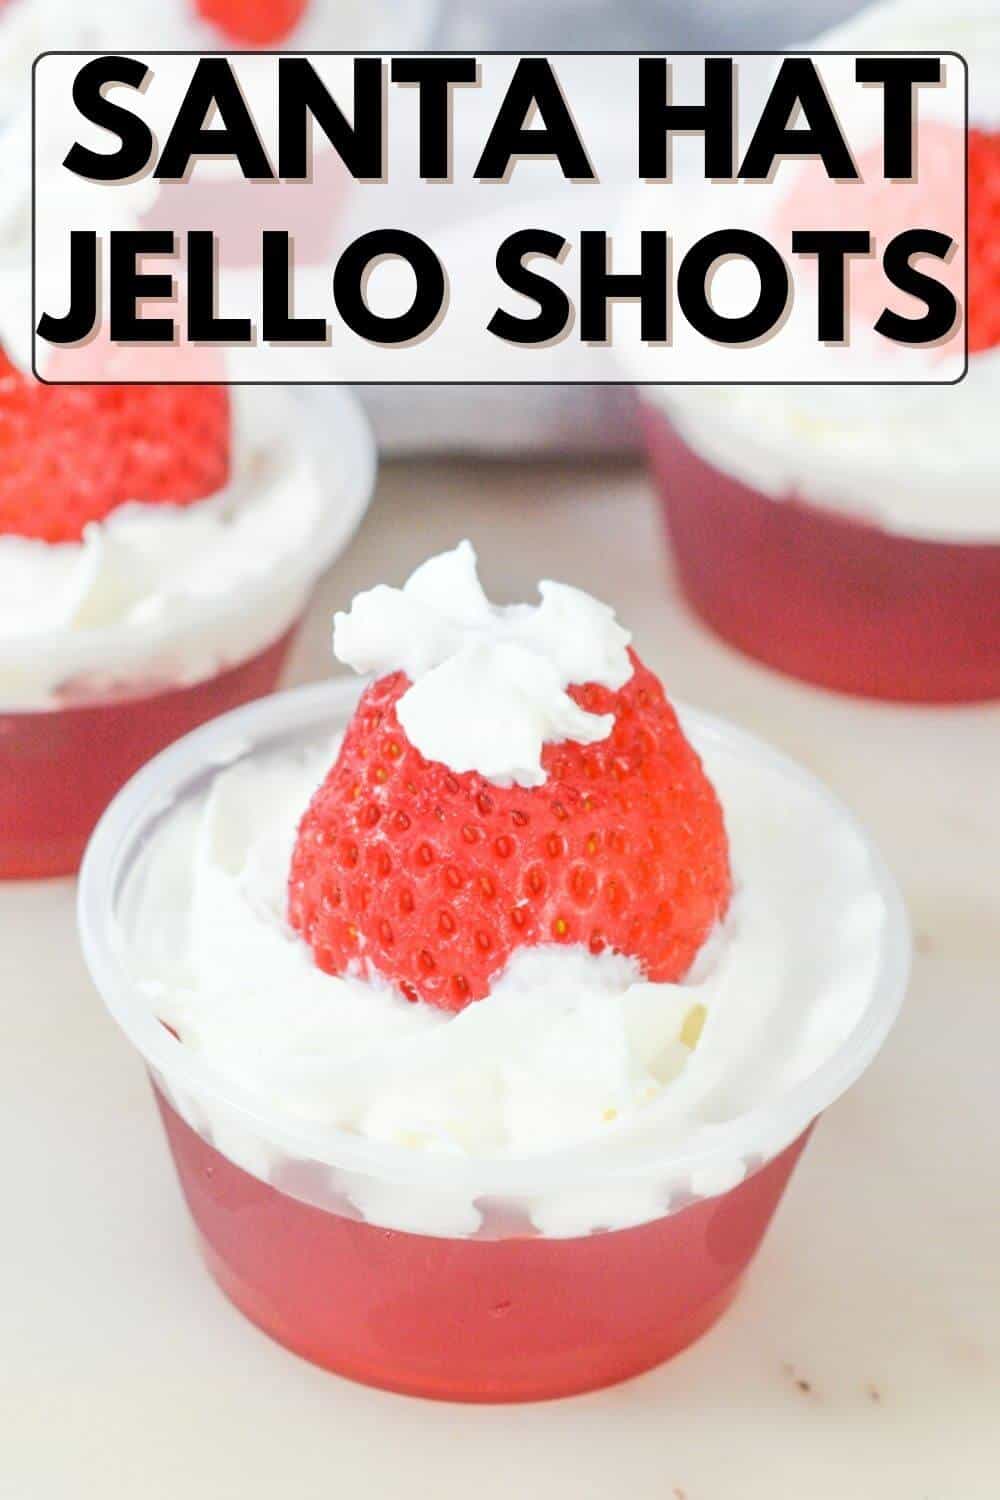 Santa hat jello shots are the perfect festive treat for your holiday celebrations.